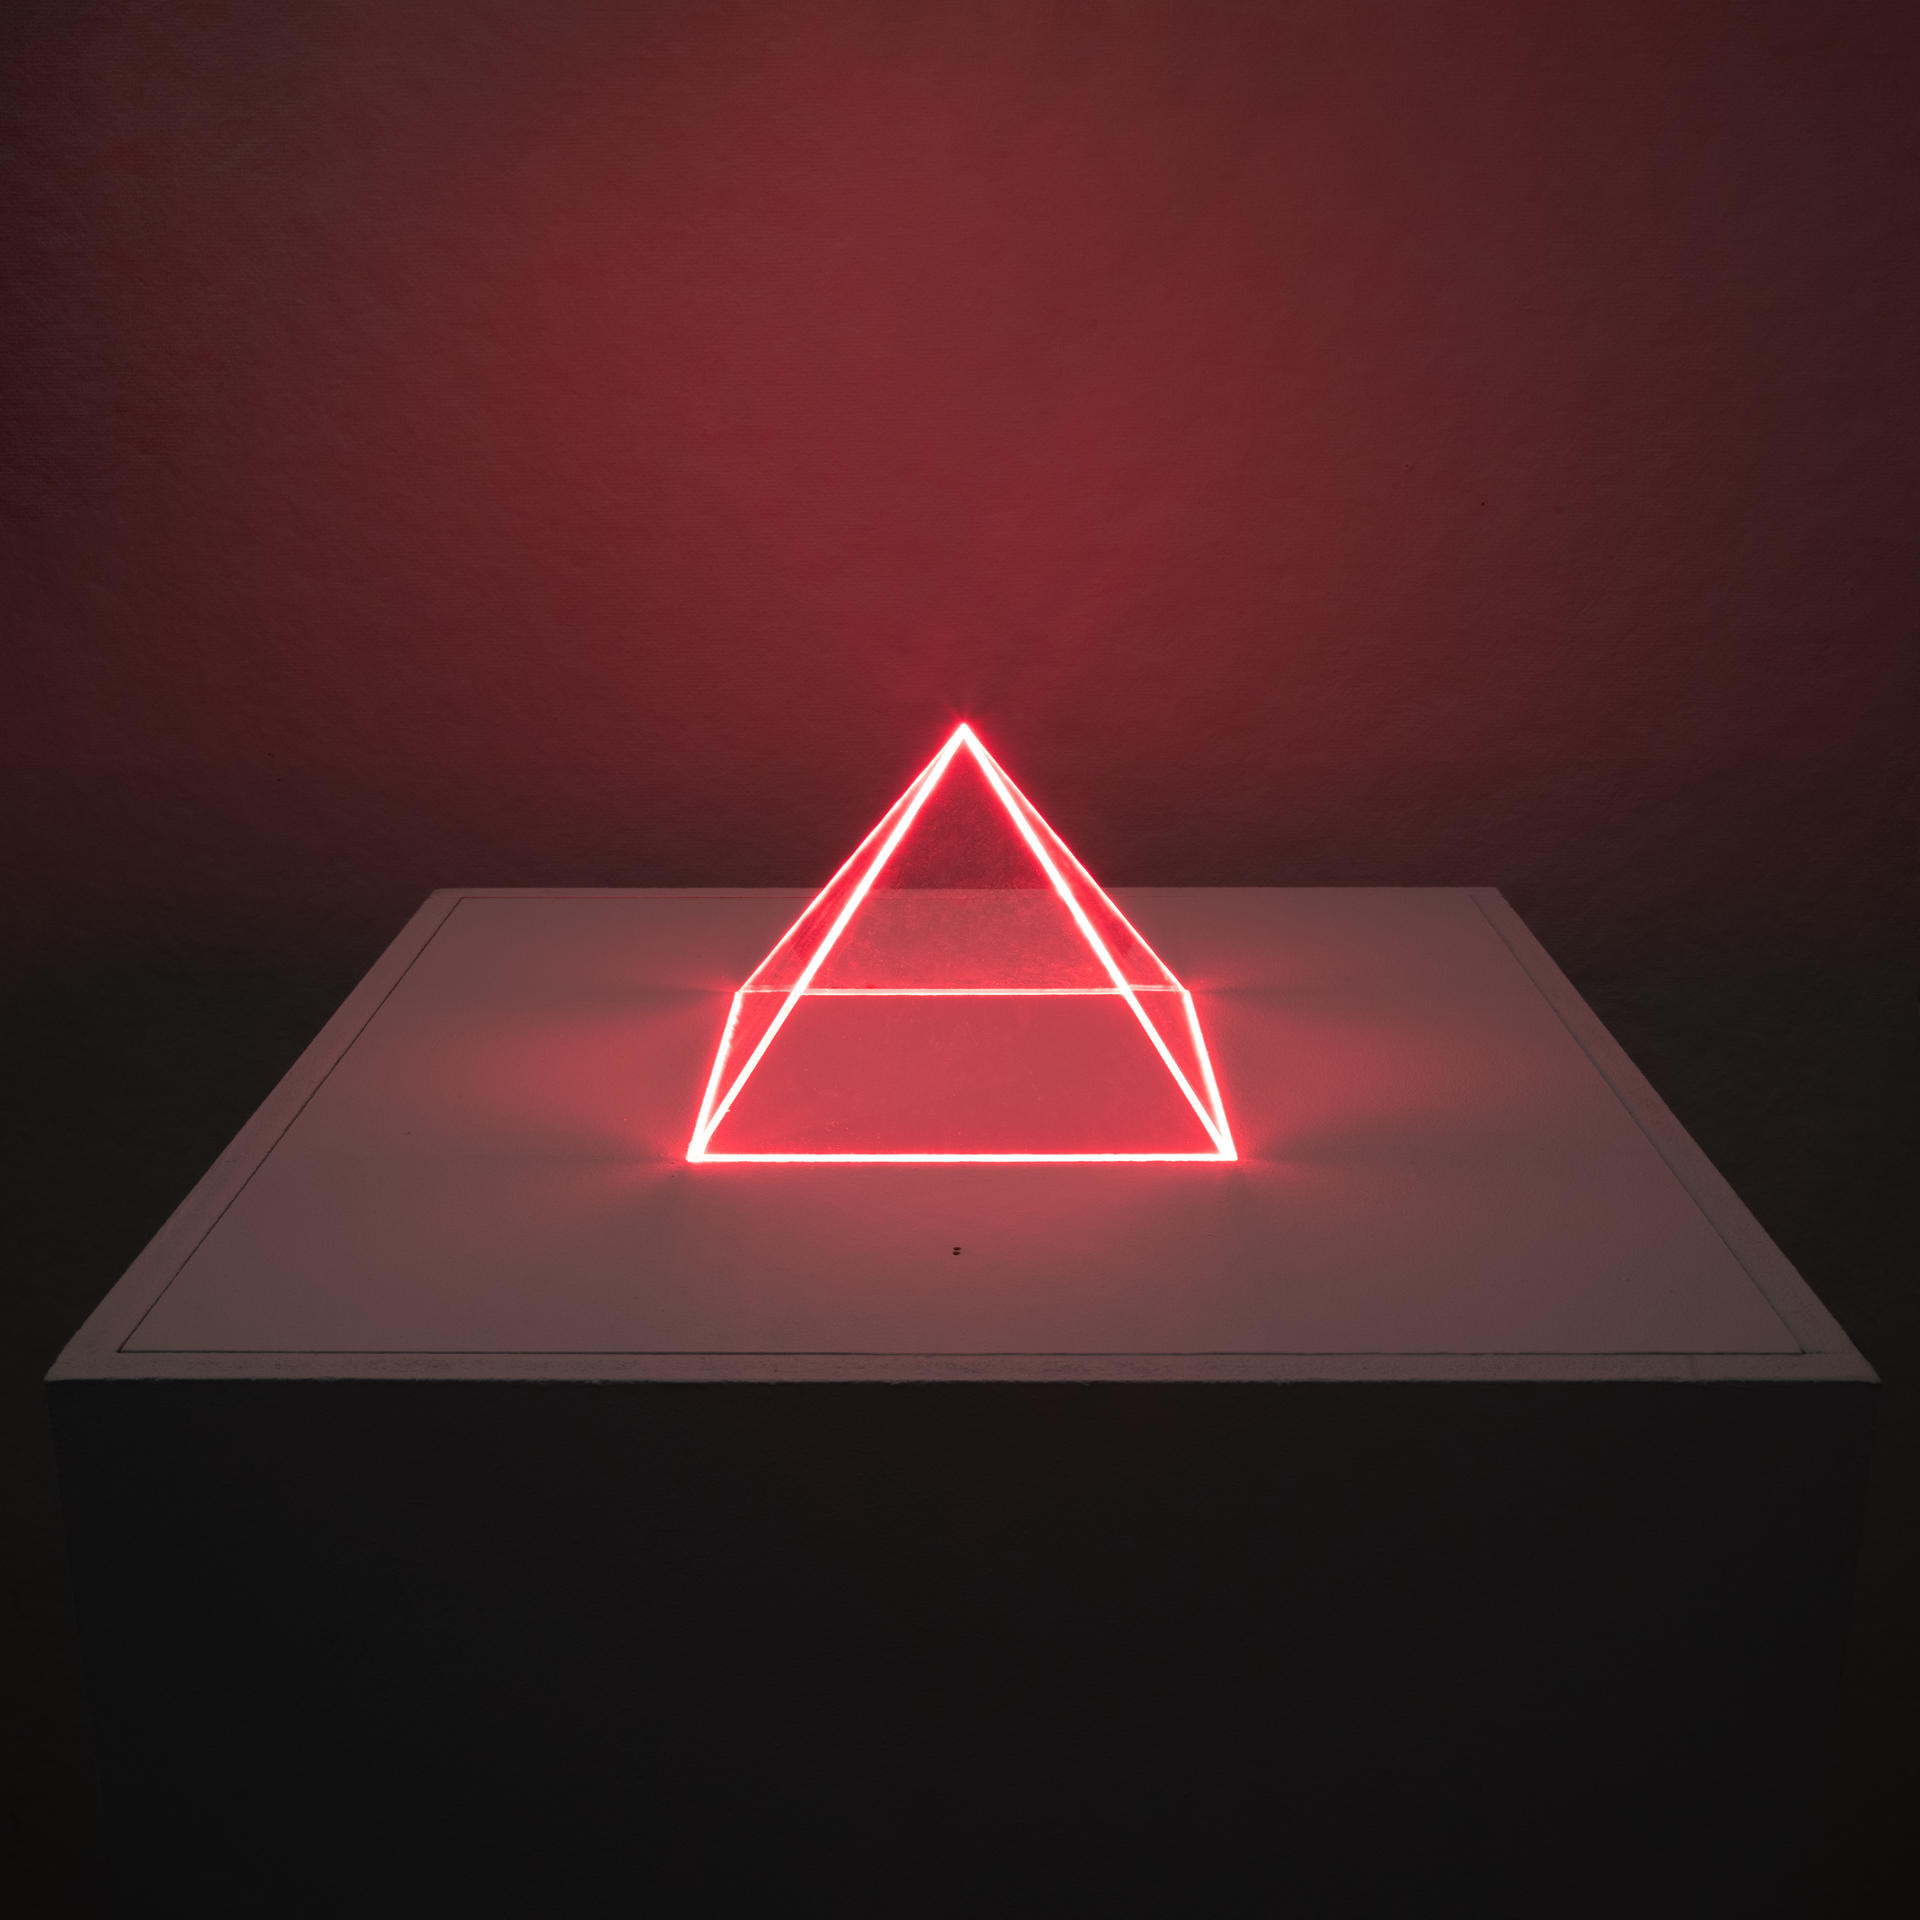 A transparent pyramid glows with its surrounding sound.